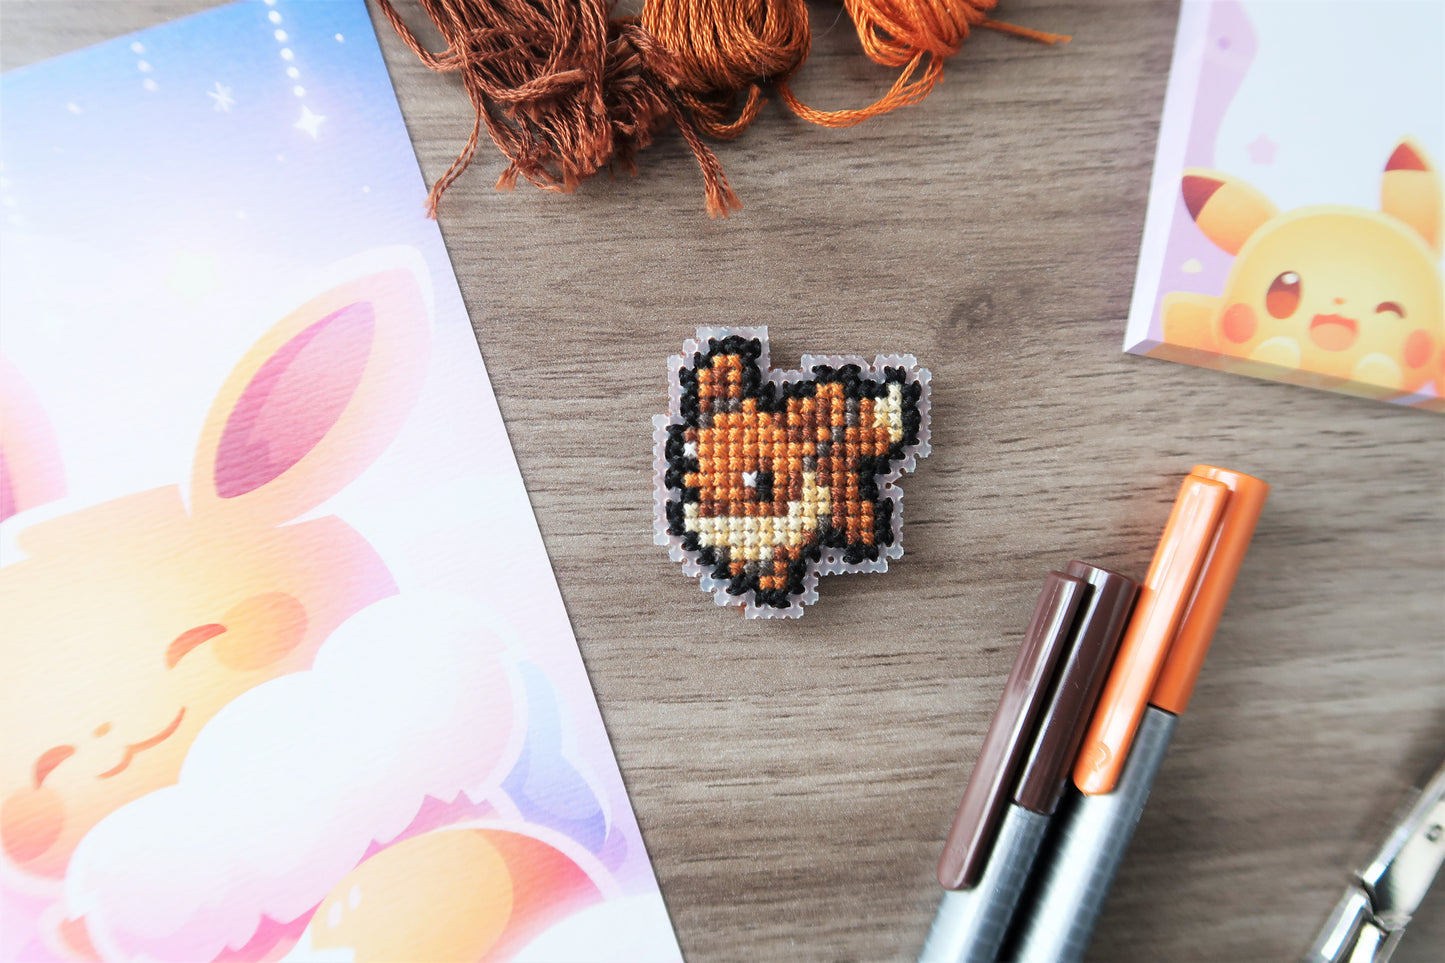 Eevee and Leafeon from Pokemon - Cross stitch magnet kit